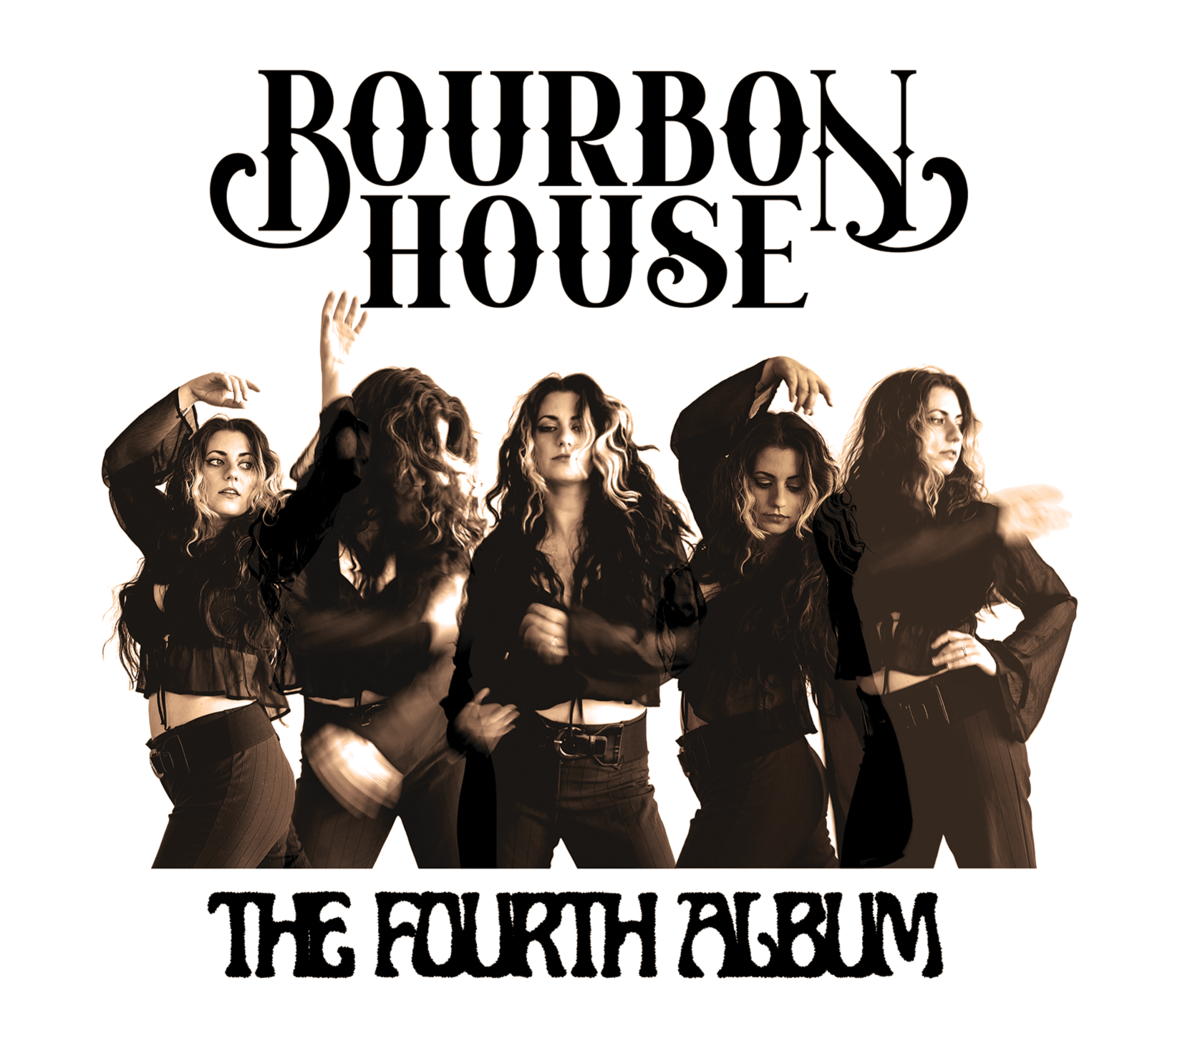 Bourbon House Released New Album “The Fourth Album” on May 28th